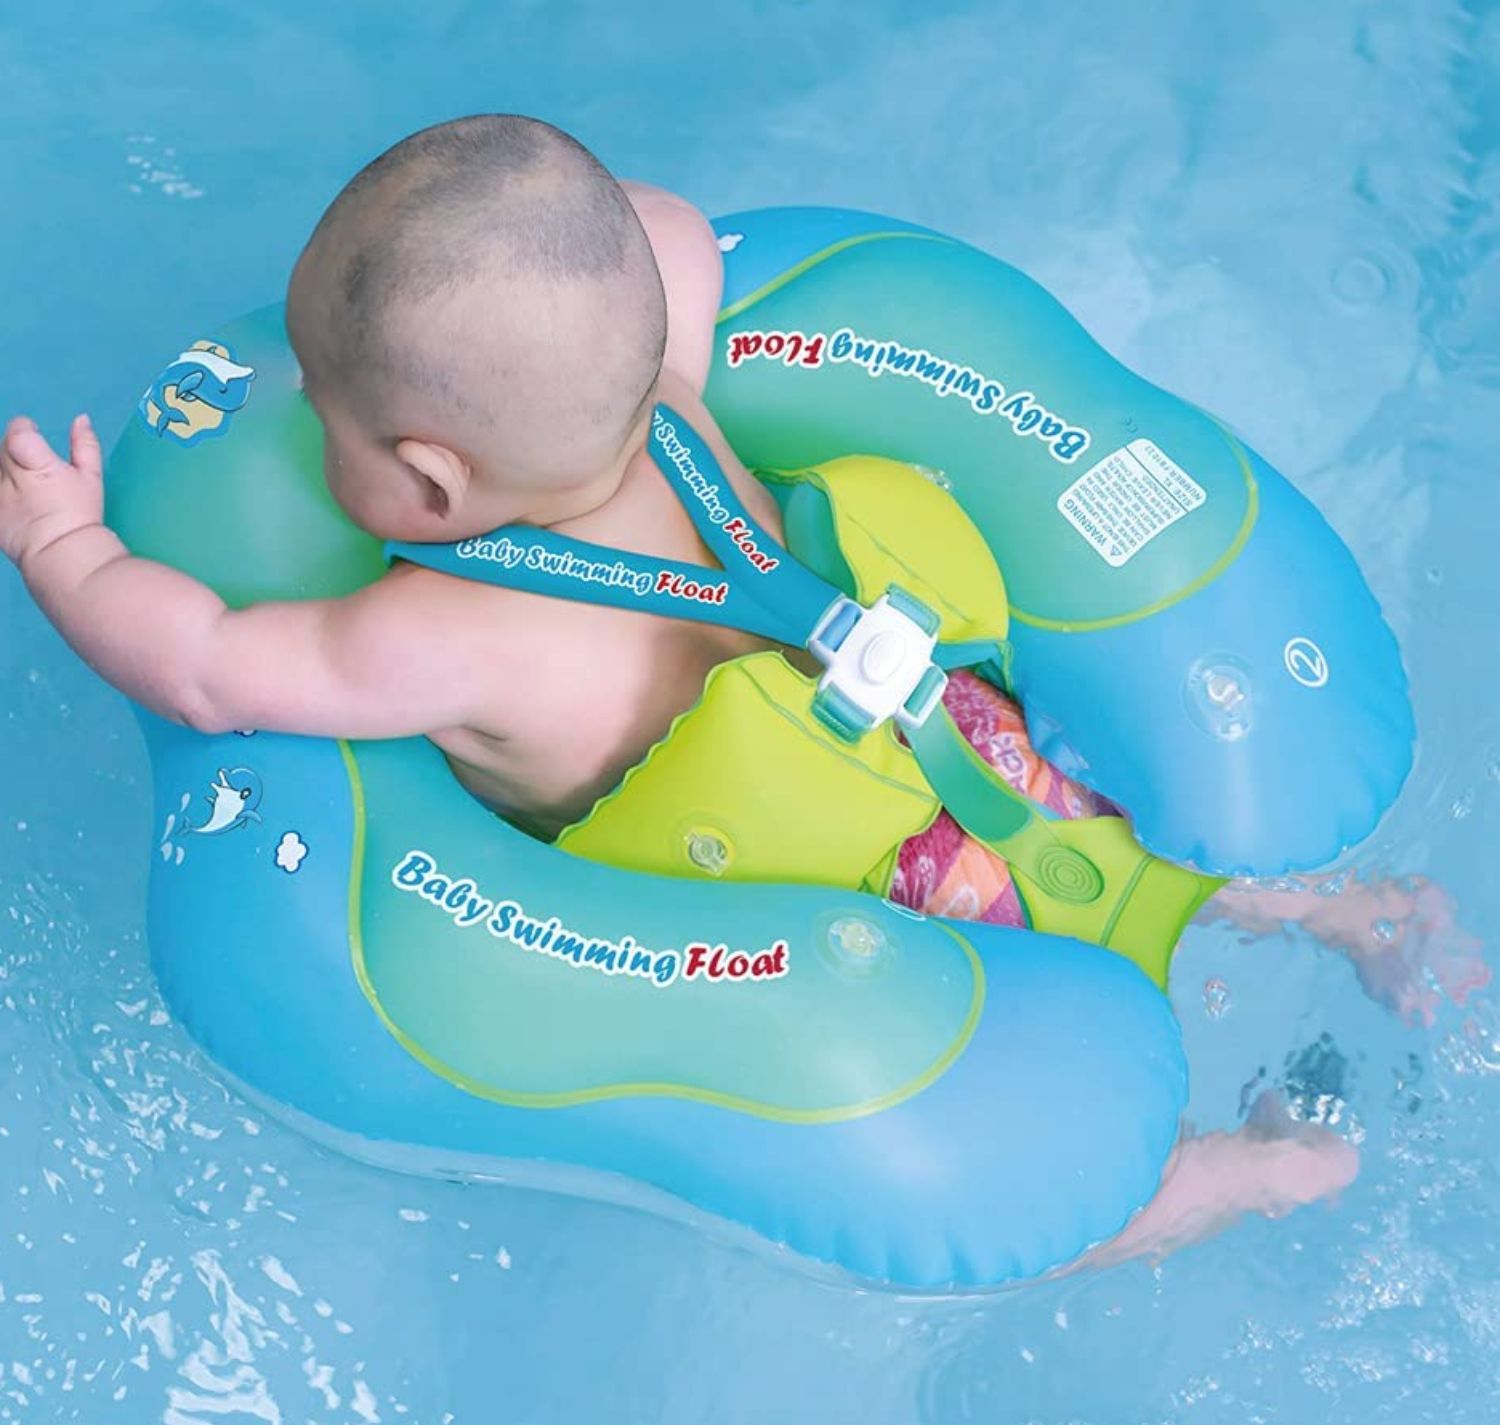 Baby sized water toys